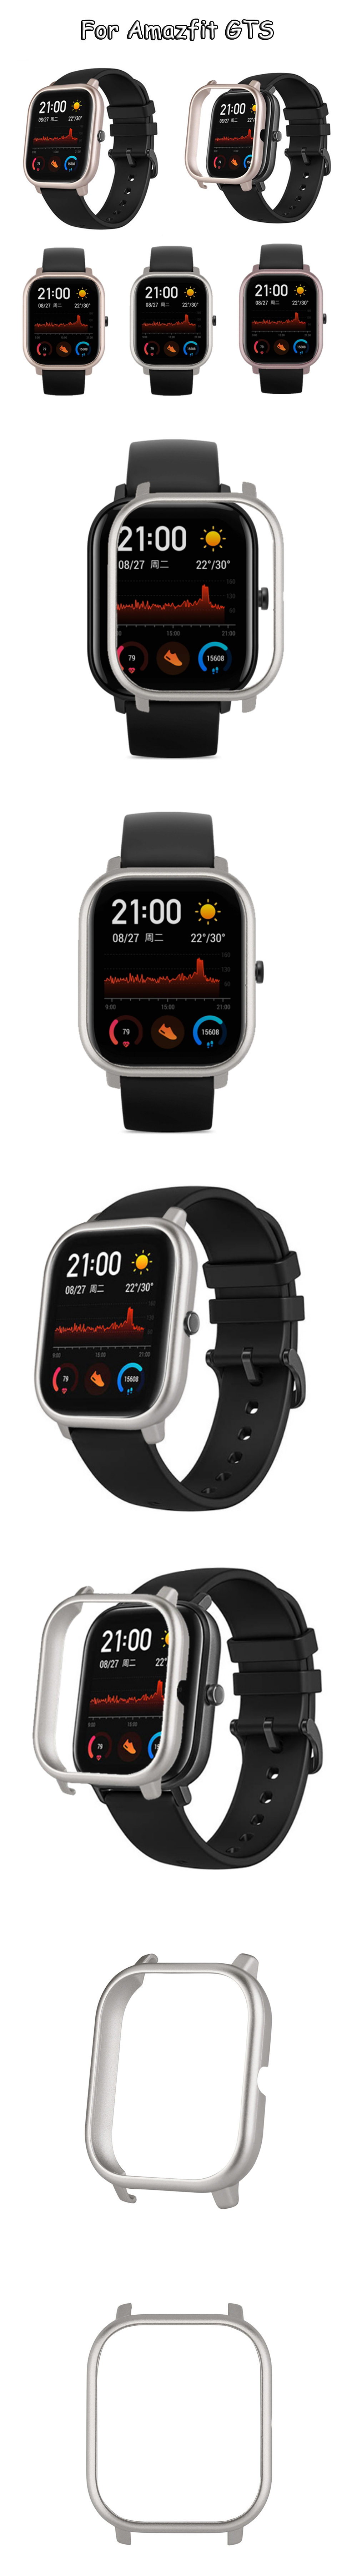 Bakeey-Ultra-Light-Scratch-Resistant-PC-Watch-Case-Cover-Watch-Cover-Screen-Protector-for-Amazfit-GT-1603000-1